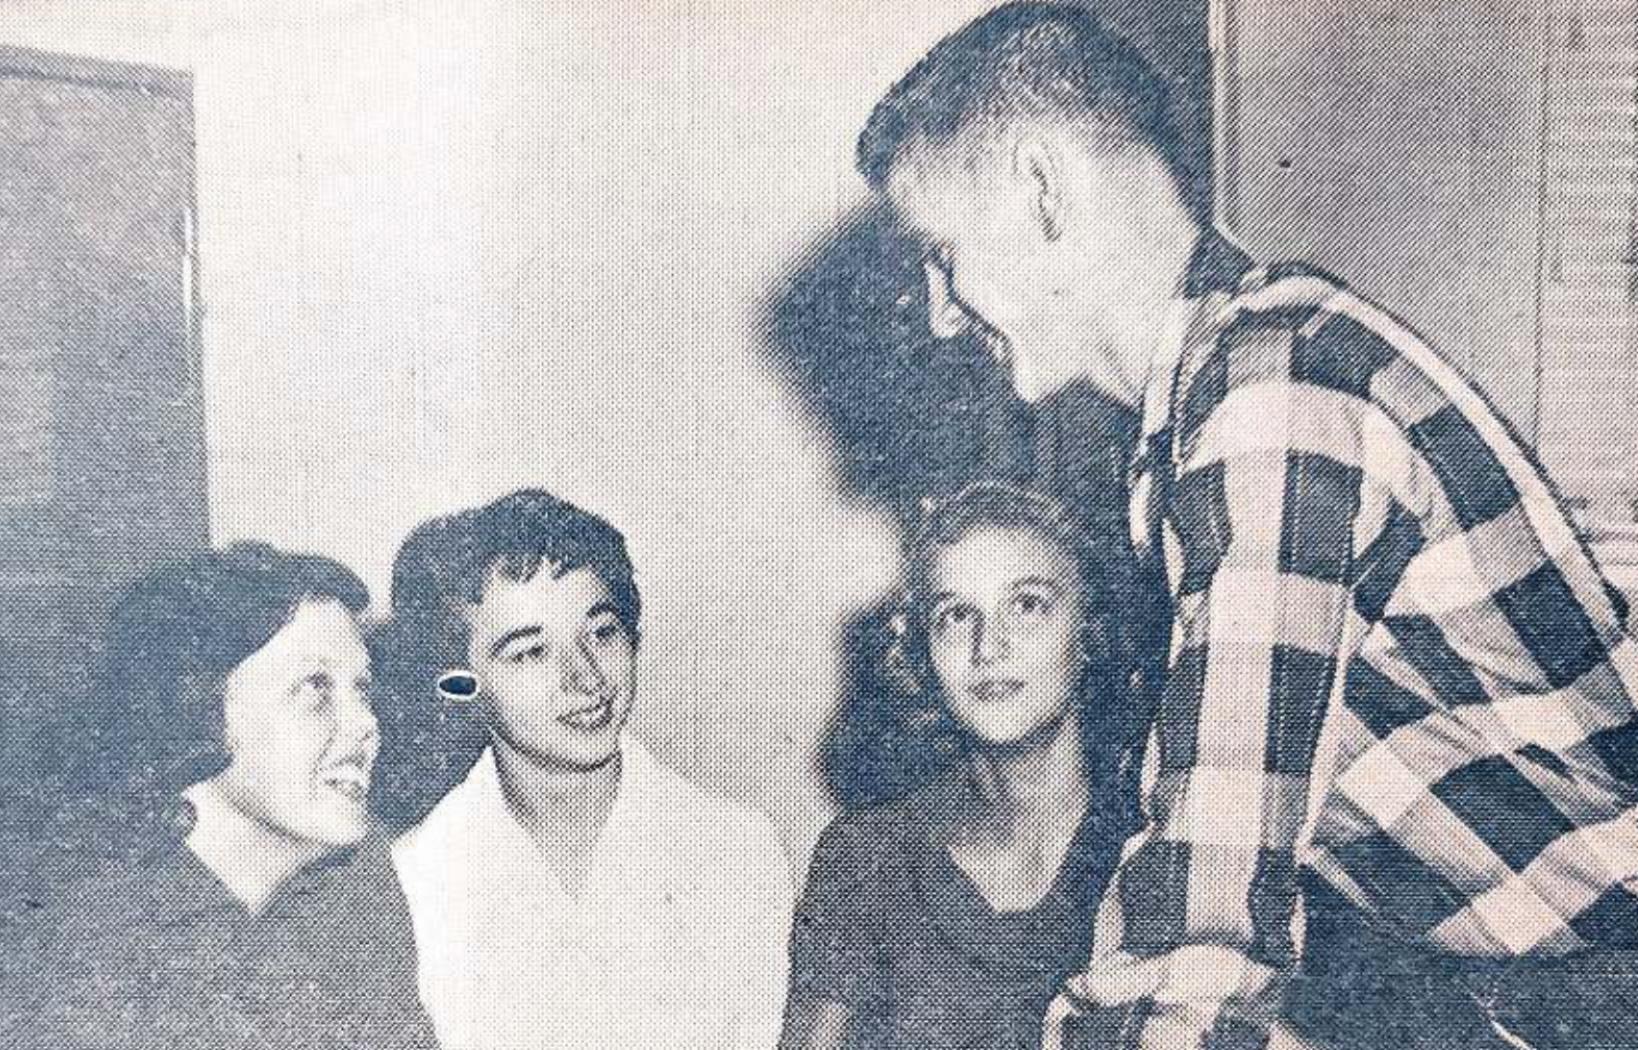 Editors for the Weatherford High School 1960-61 “Eagle” yearbook met to make plans for the year. From left is Margaret North, feature editor; Elaine Perry, copy editor; Eileen Sauer, photography editor; and Wesley Mitchell, managing editor. This picture was taken from the October 27, 1960, edition of the Weatherford Daily News.